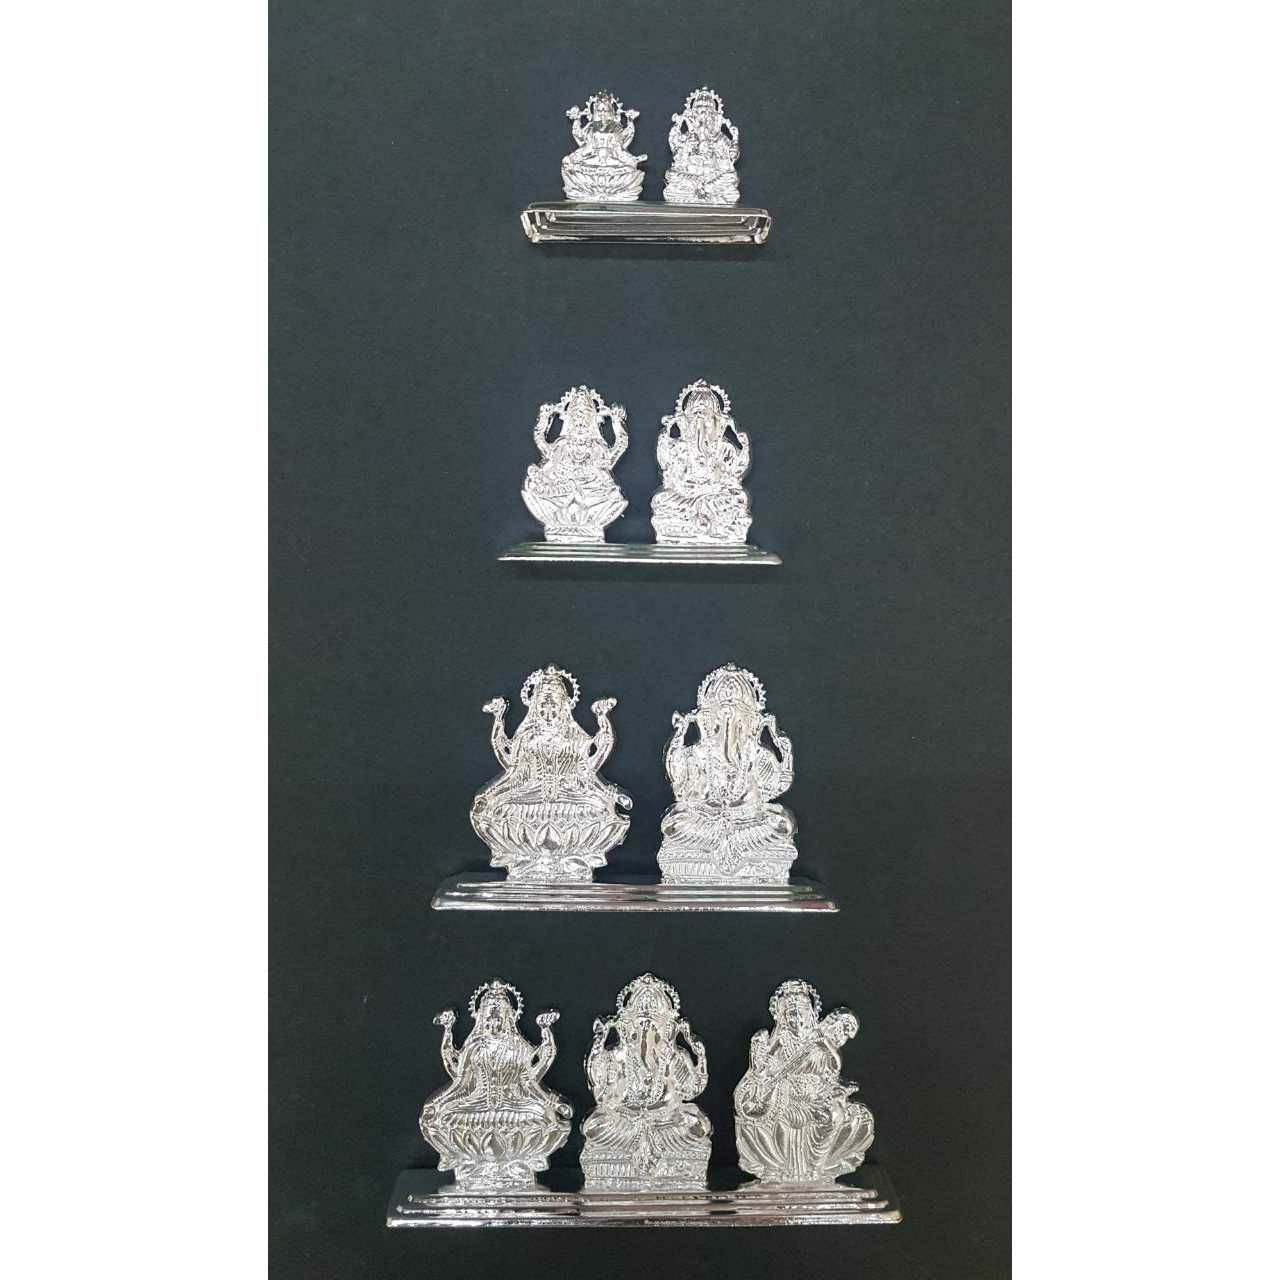 All Dabal(joint) Size Casting Murti(Bhagvan,God) With All Side